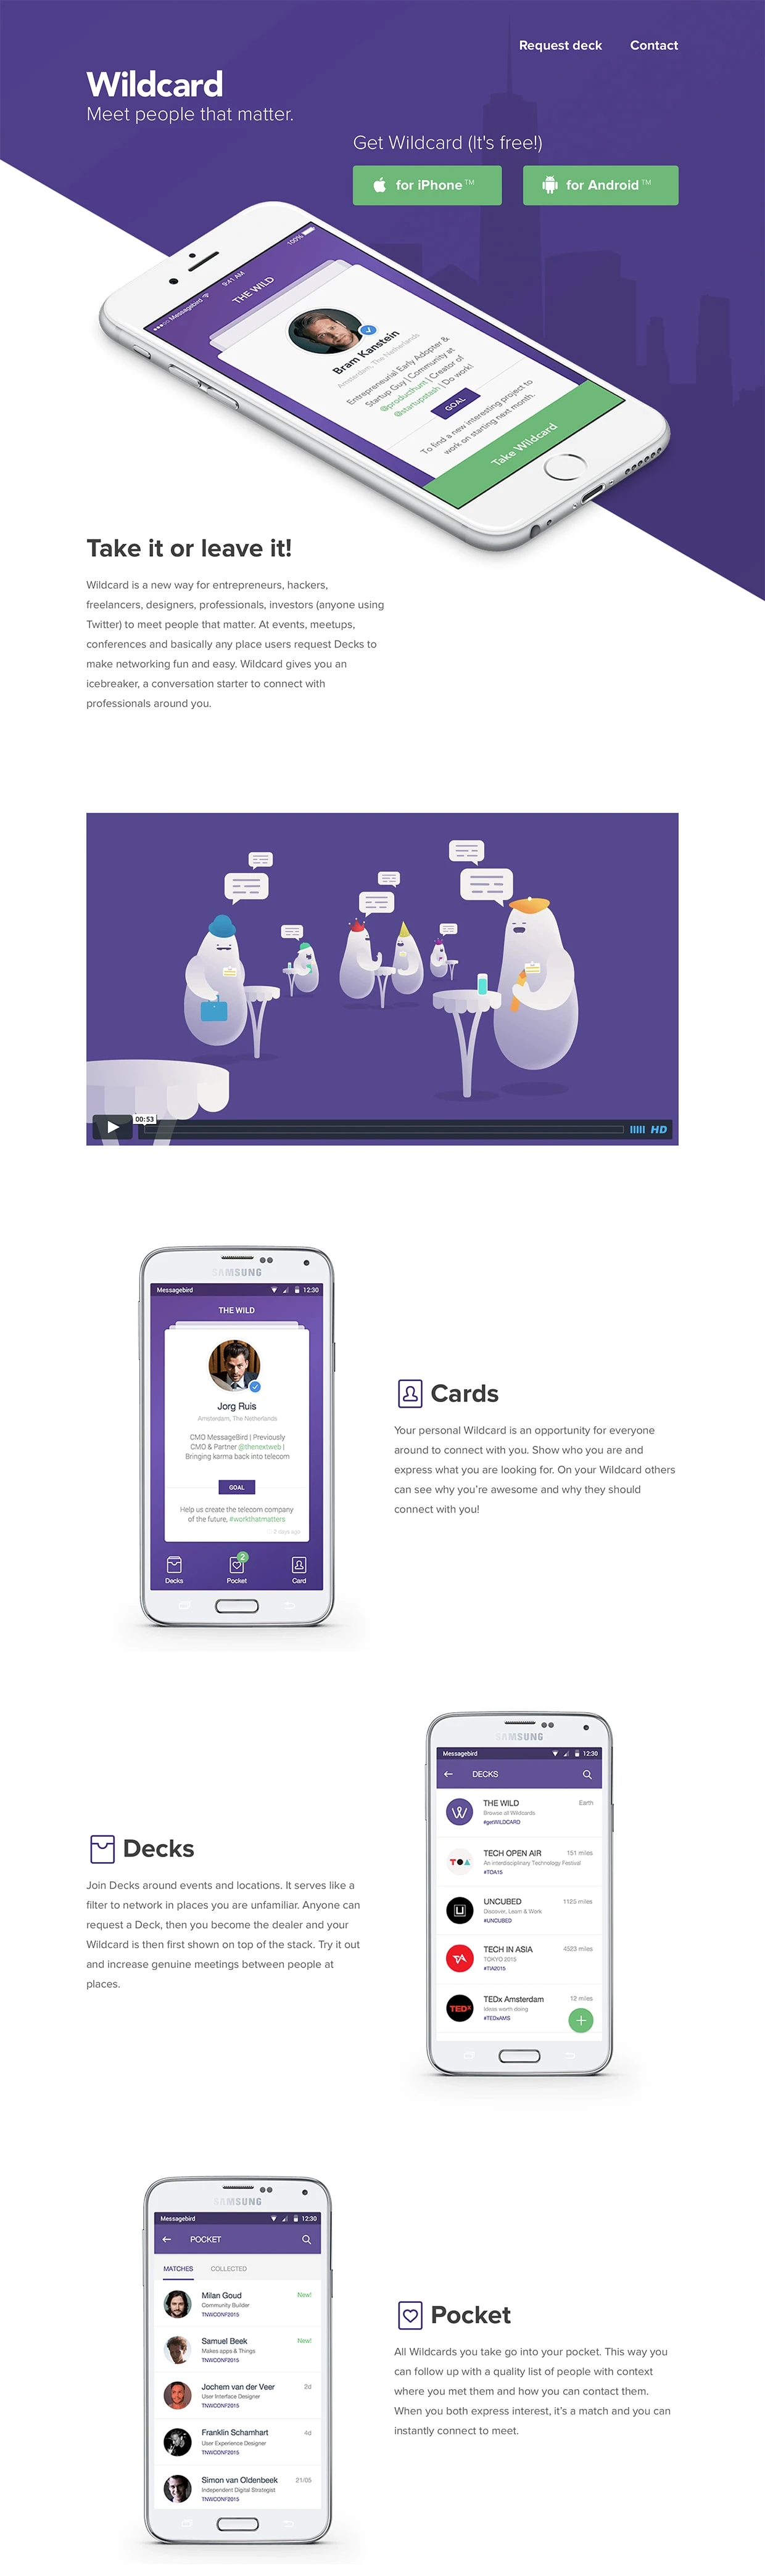 Wildcard Landing Page Example: Wildcard is a new way to meet people that matter at events, meetups, conferences and basically any place. Wildcard gives you an icebreaker, a conversation starter to connect with professionals around you.